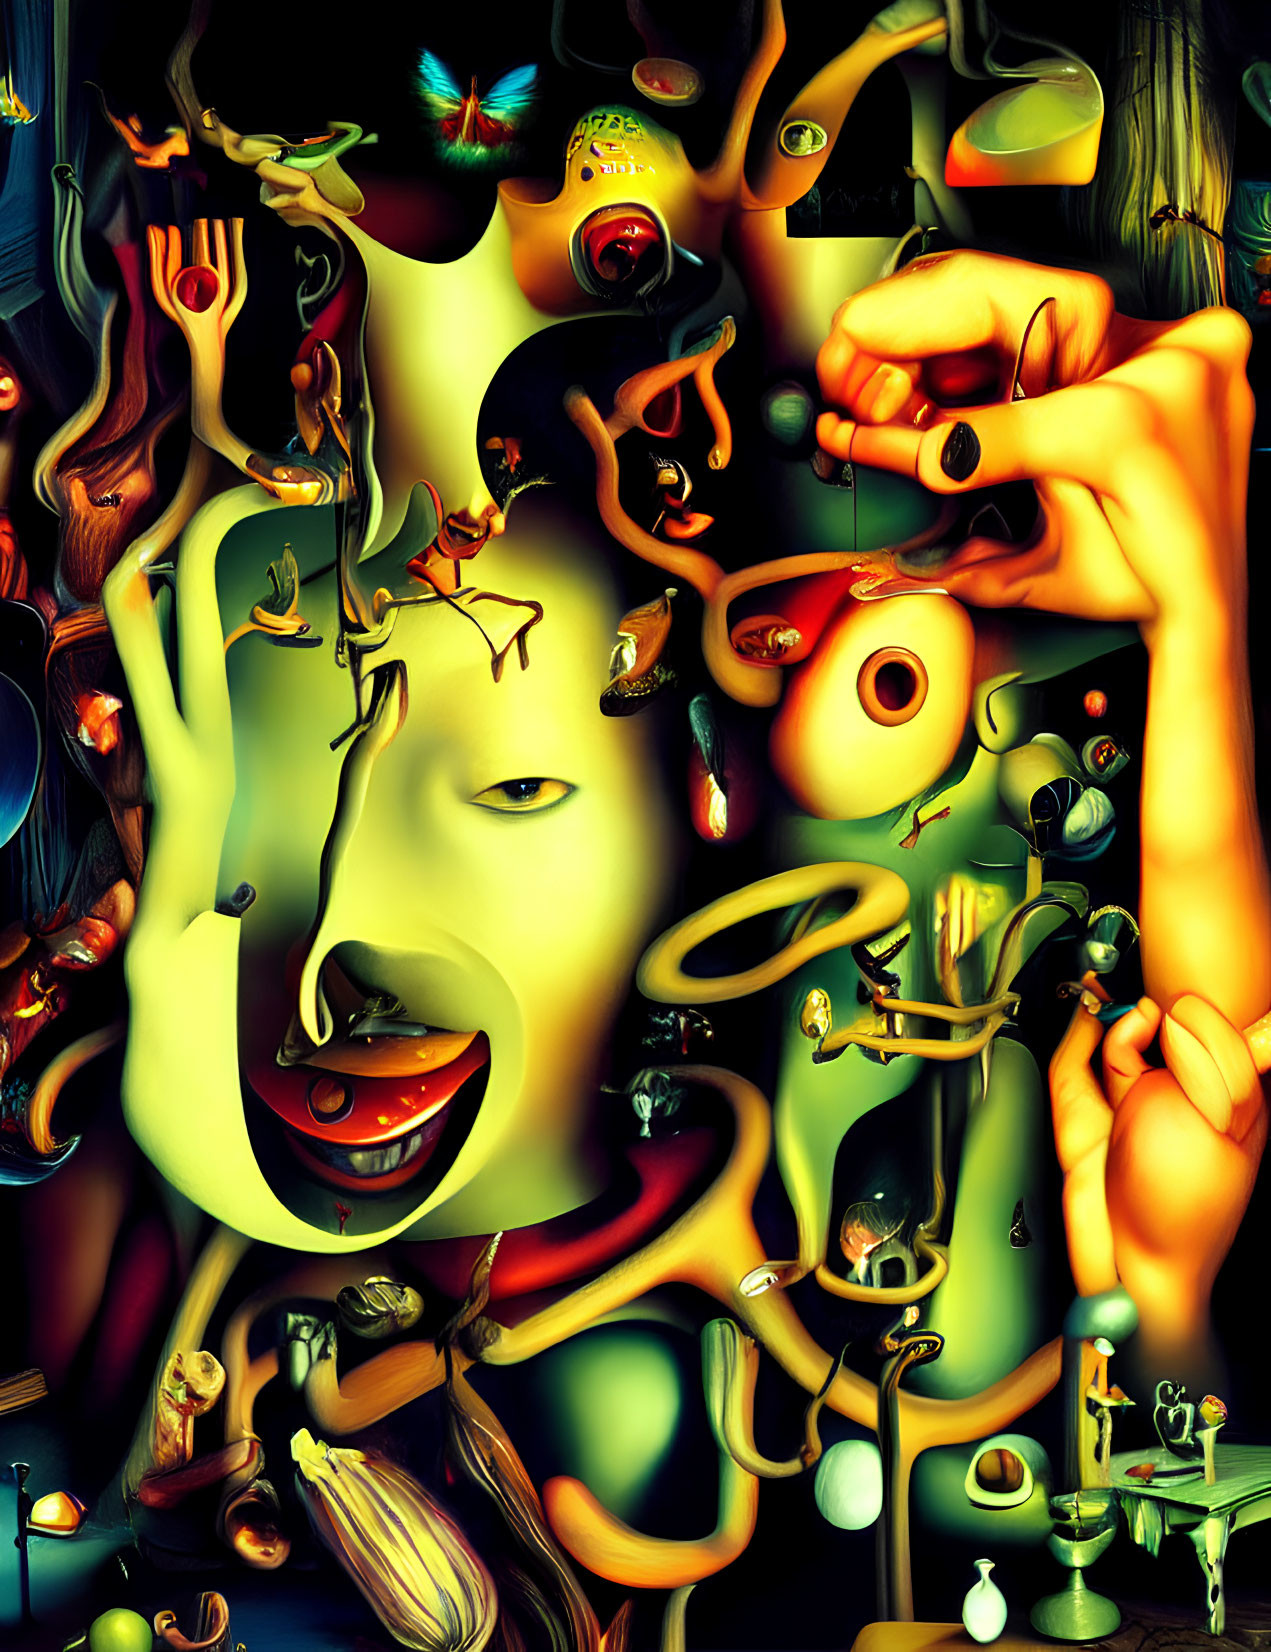 Abstract surreal artwork: distorted faces and body parts mingled with objects